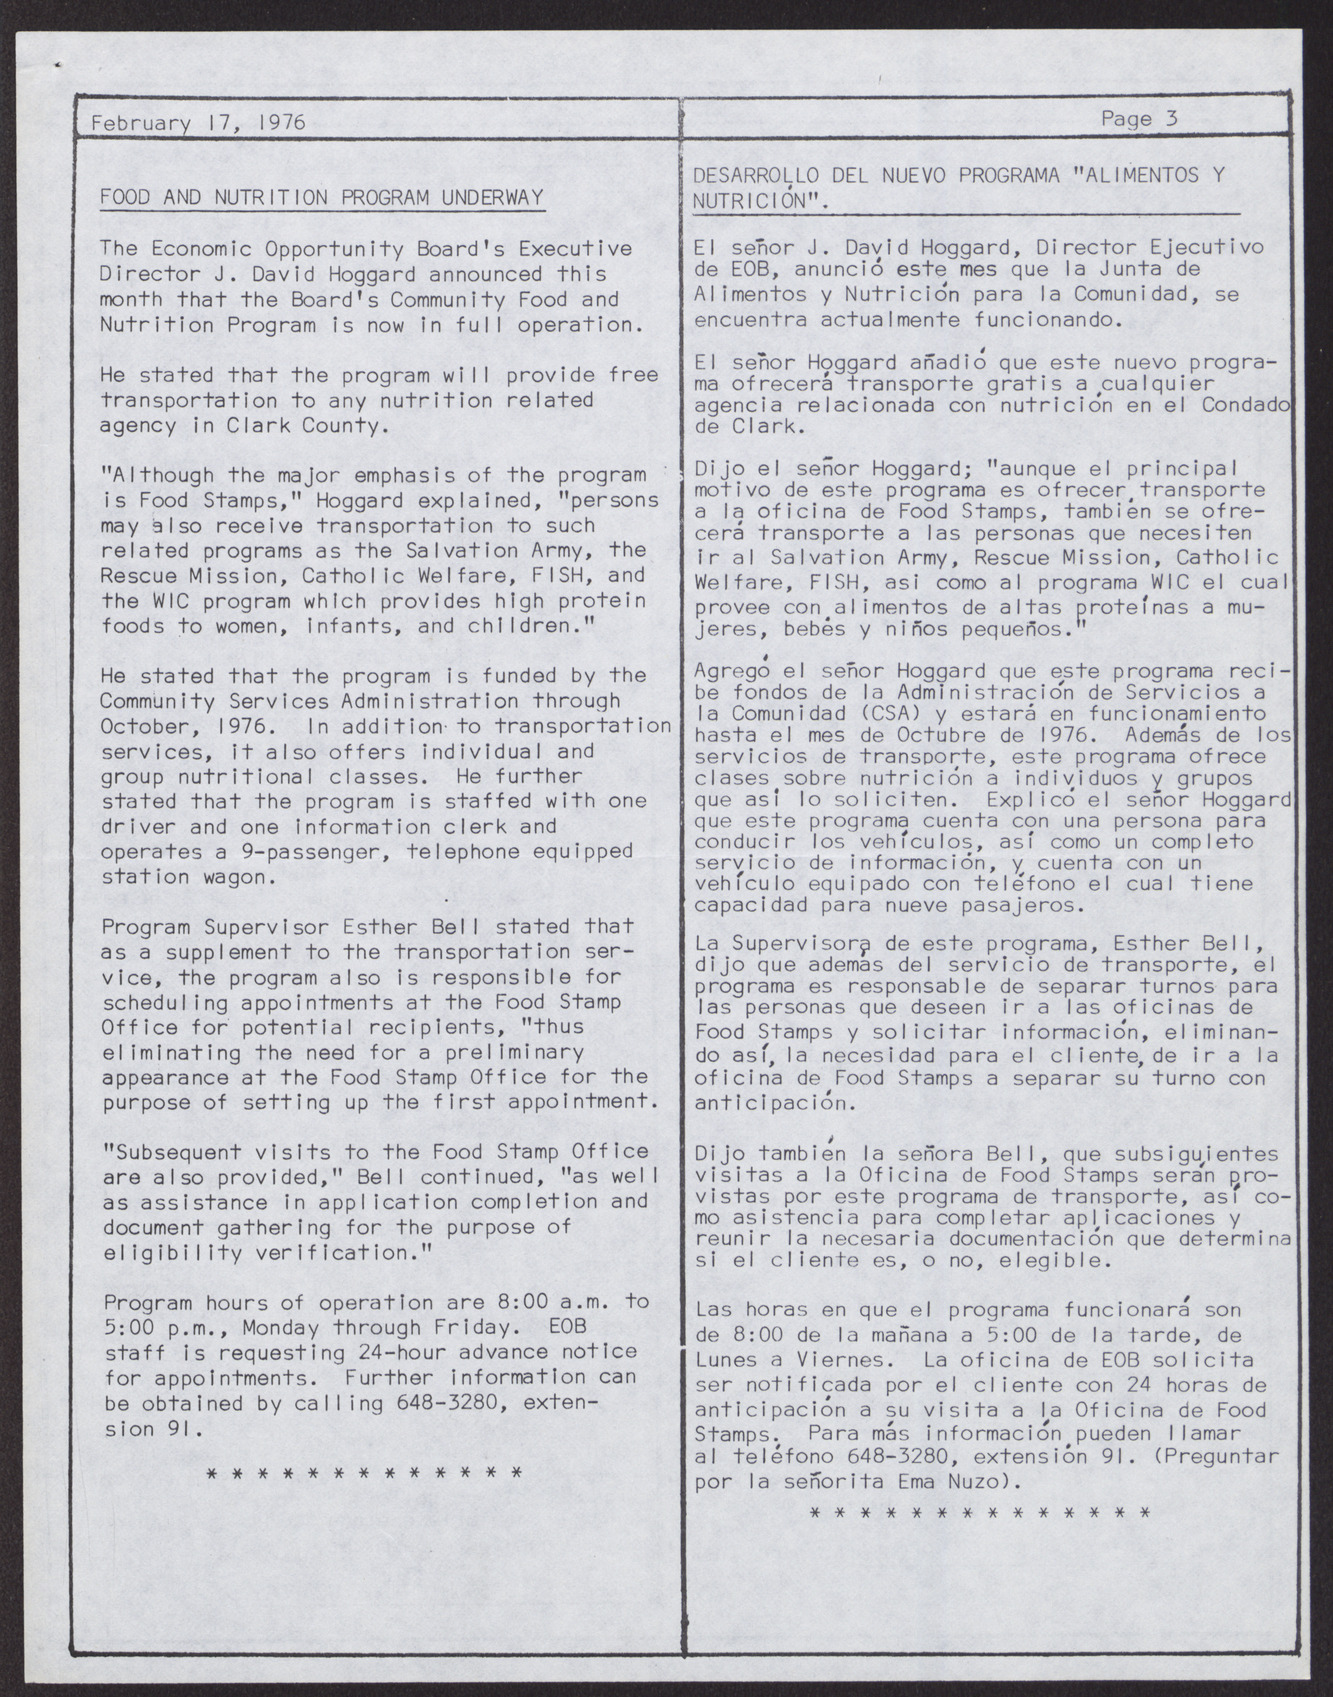 EOB Bulletin newsletter (12 pages), February 17, 1976, page 2